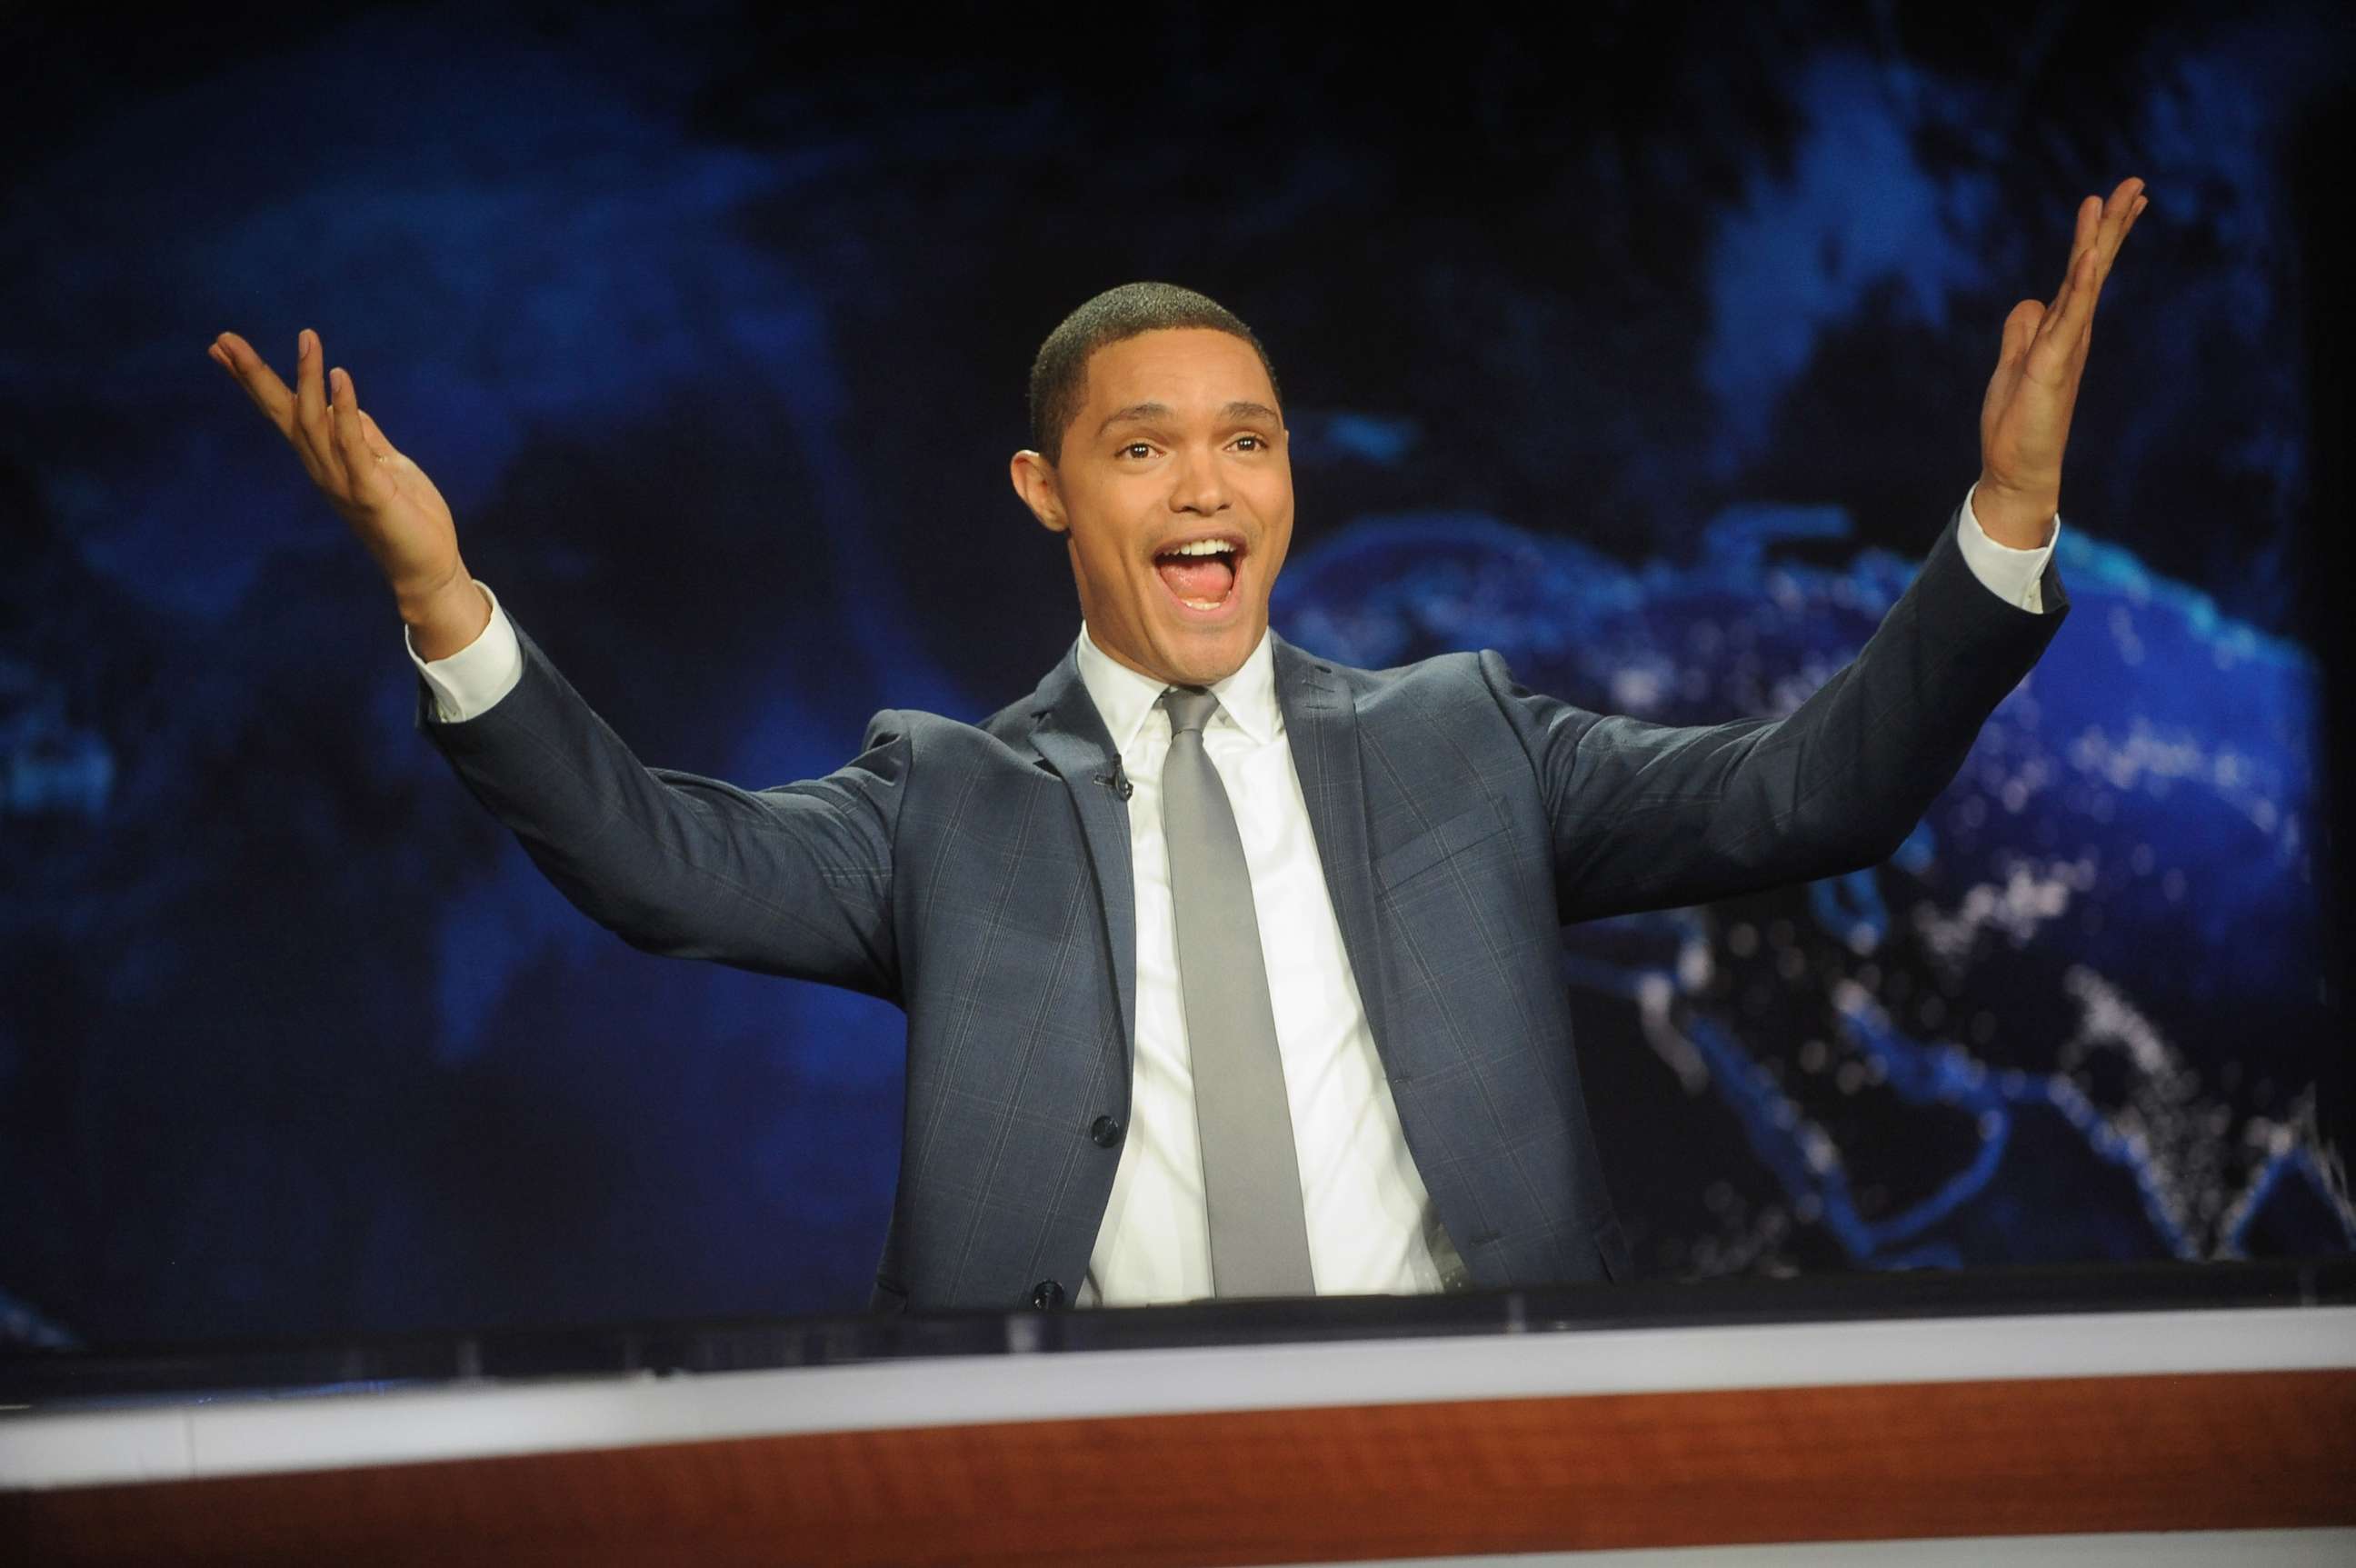 PHOTO: Trevor Noah hosts Comedy Central's "The Daily Show with Trevor Noah" premiere on September 28, 2015 in New York City. 